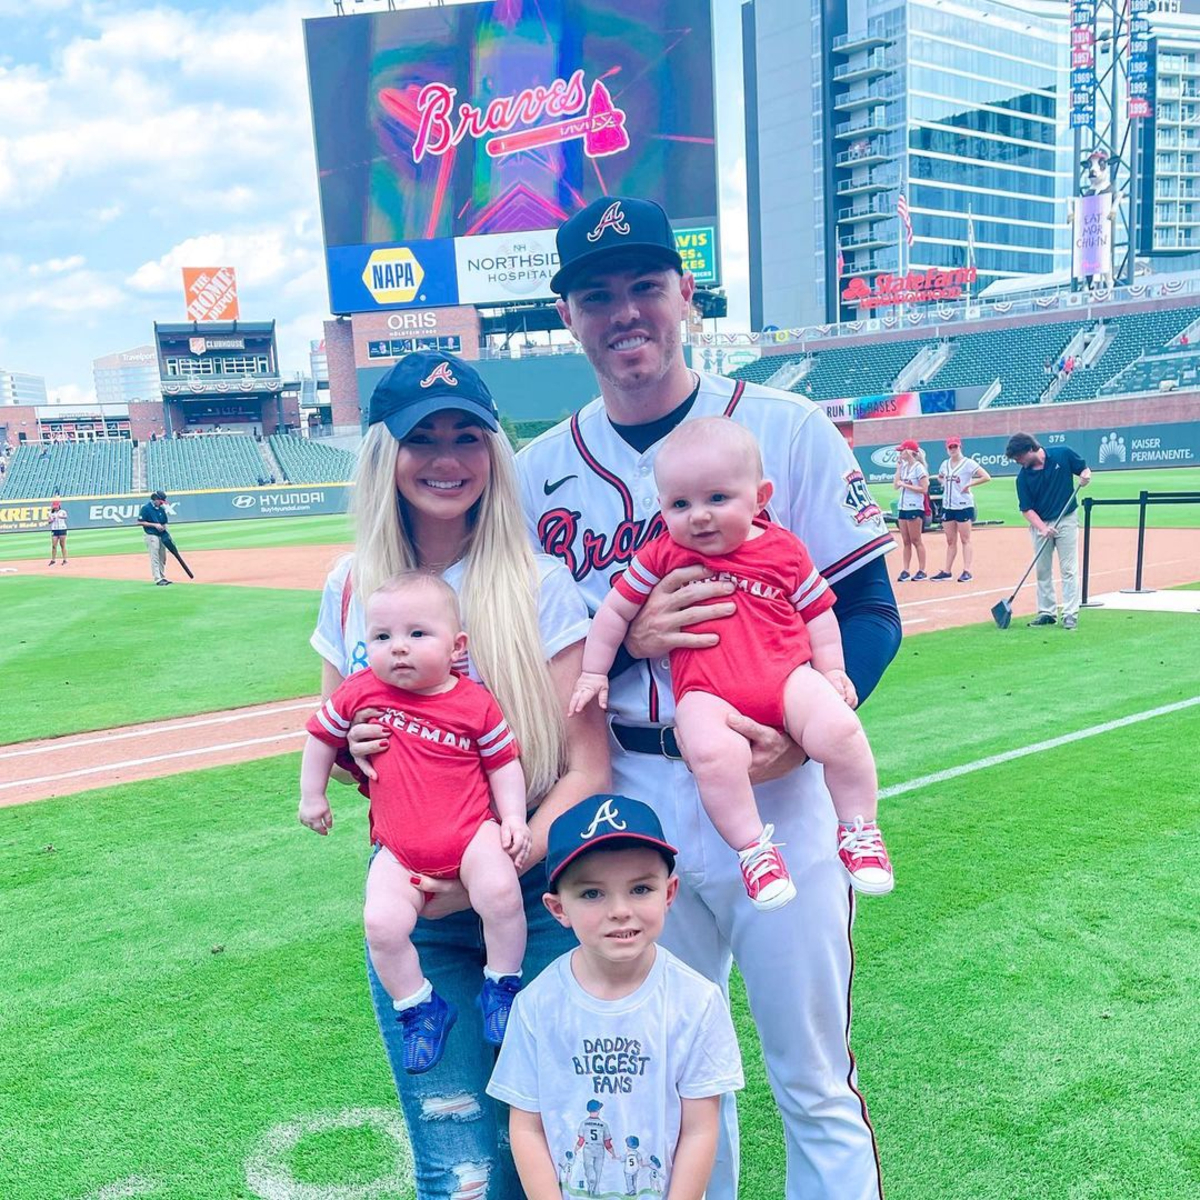 Chelsea Freeman shows love for Atlanta with Dodgers-Braves series